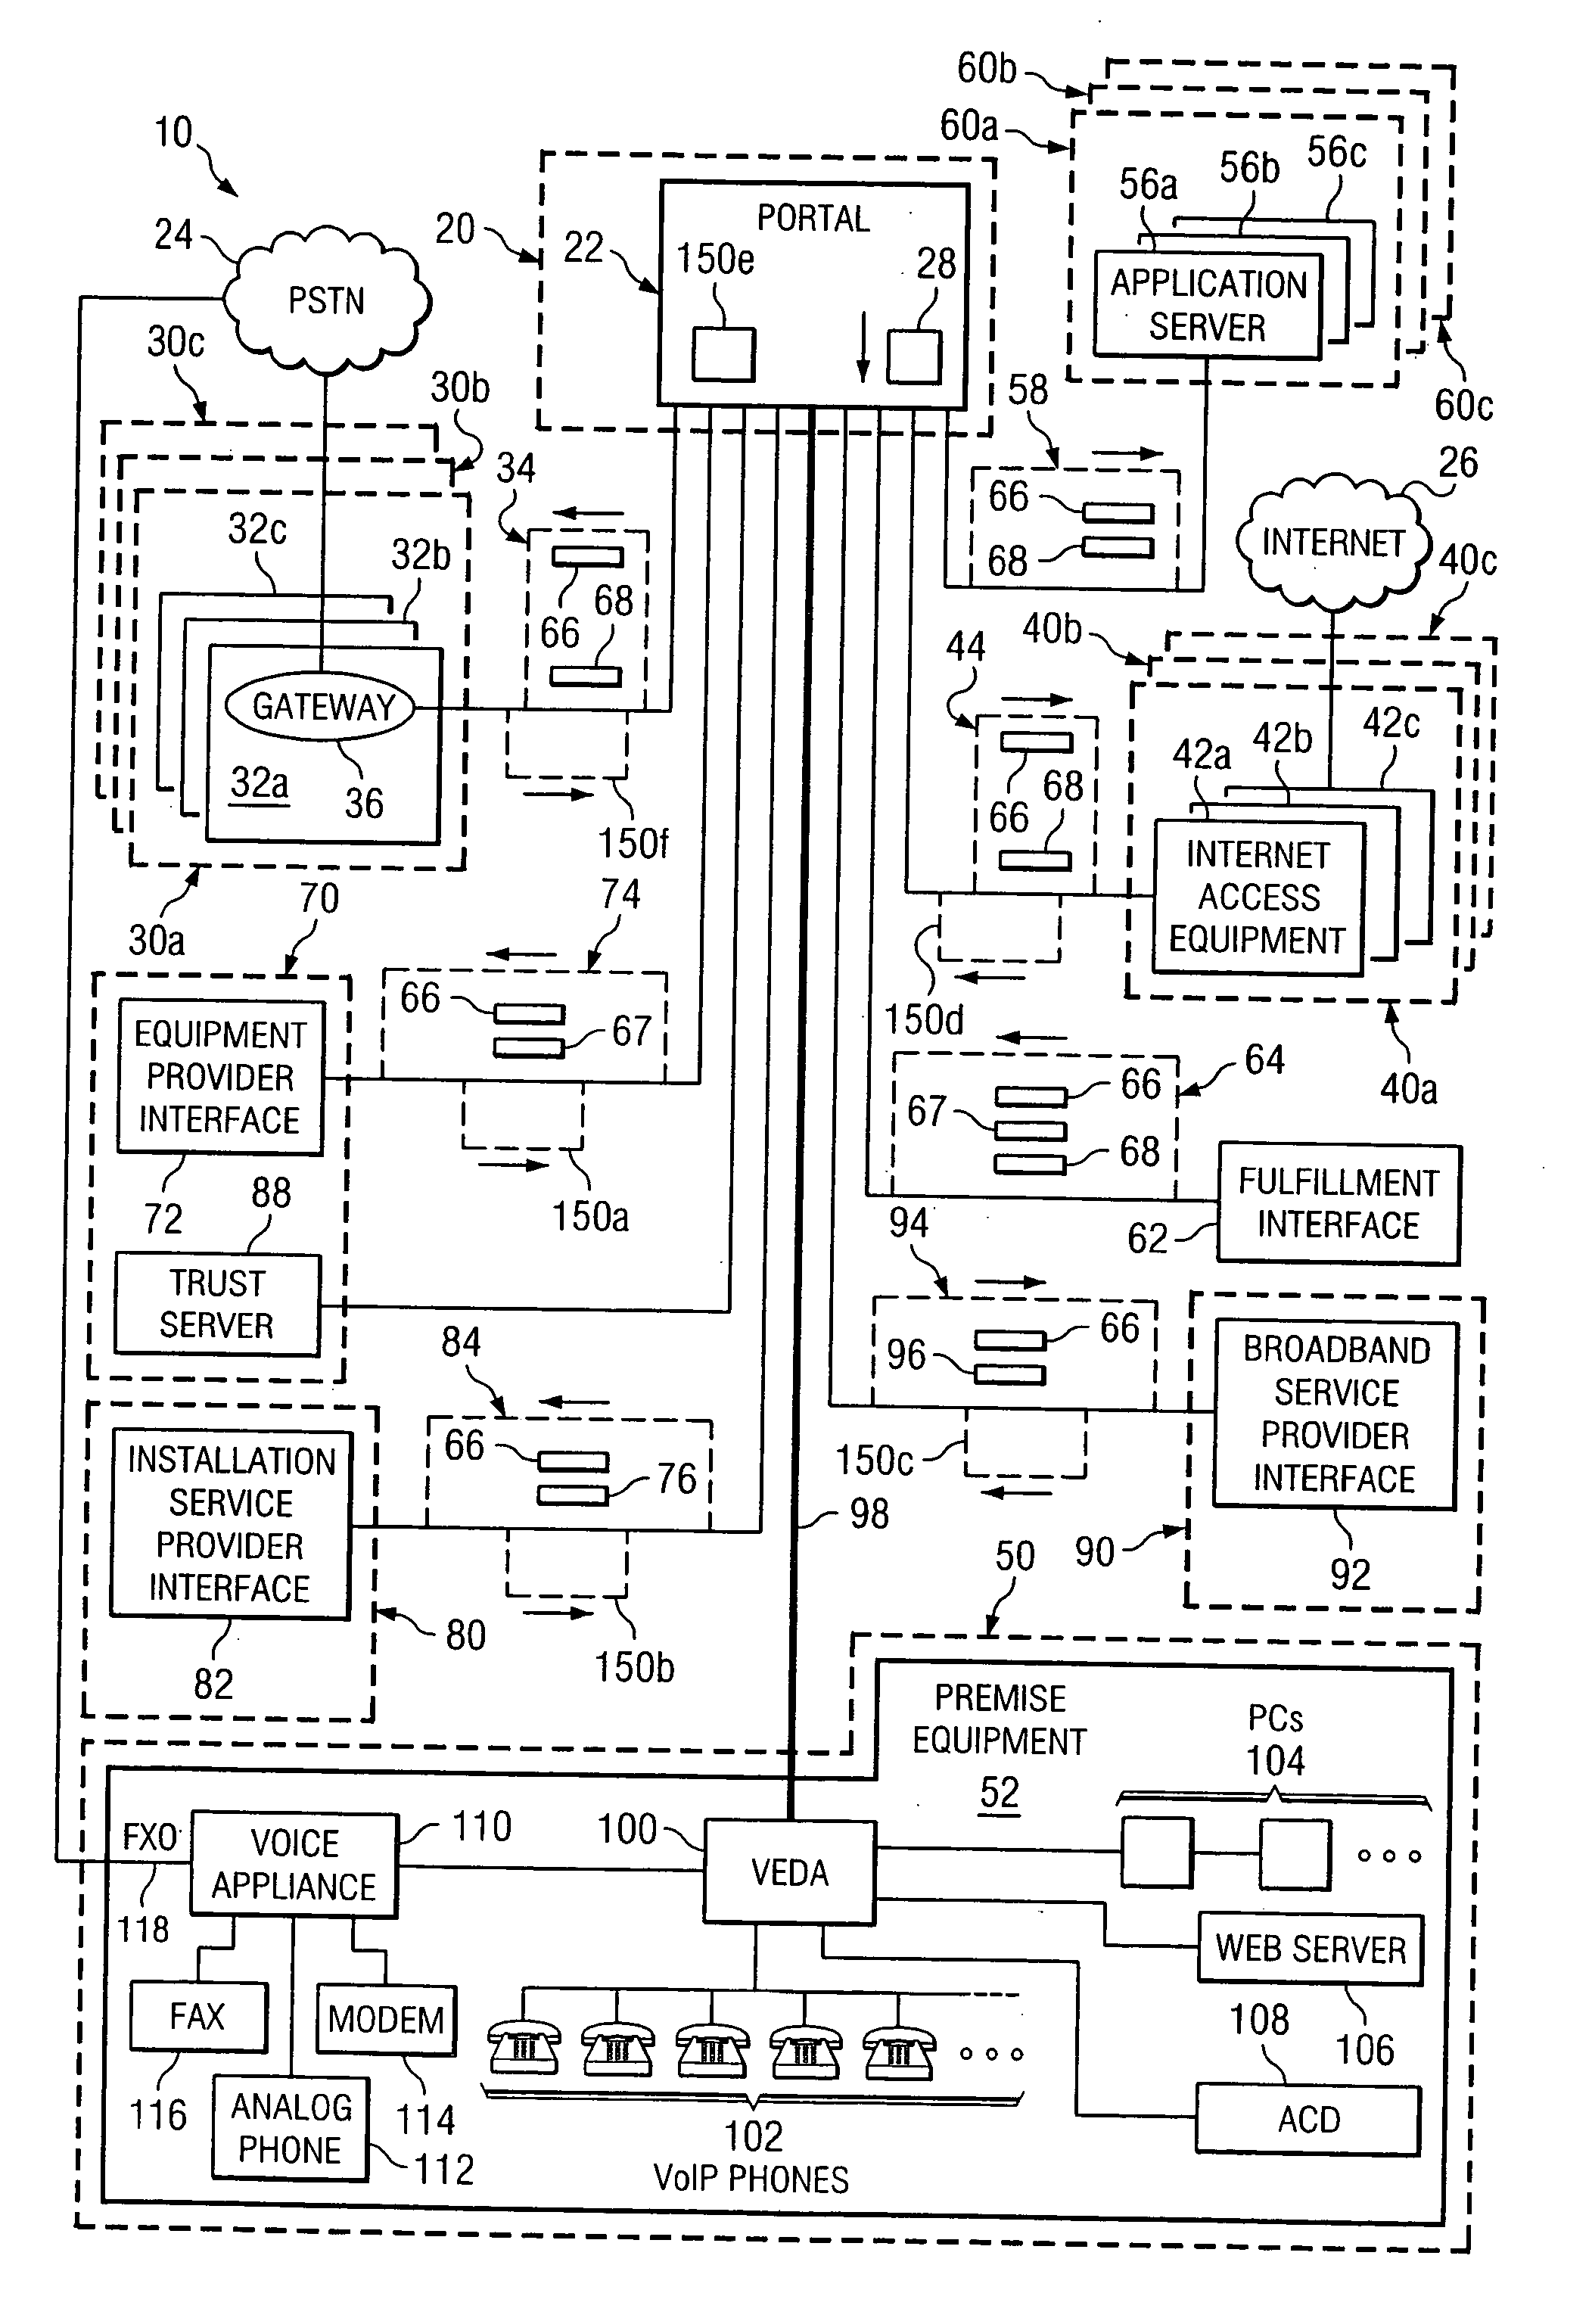 Method and system for operating a communication service portal